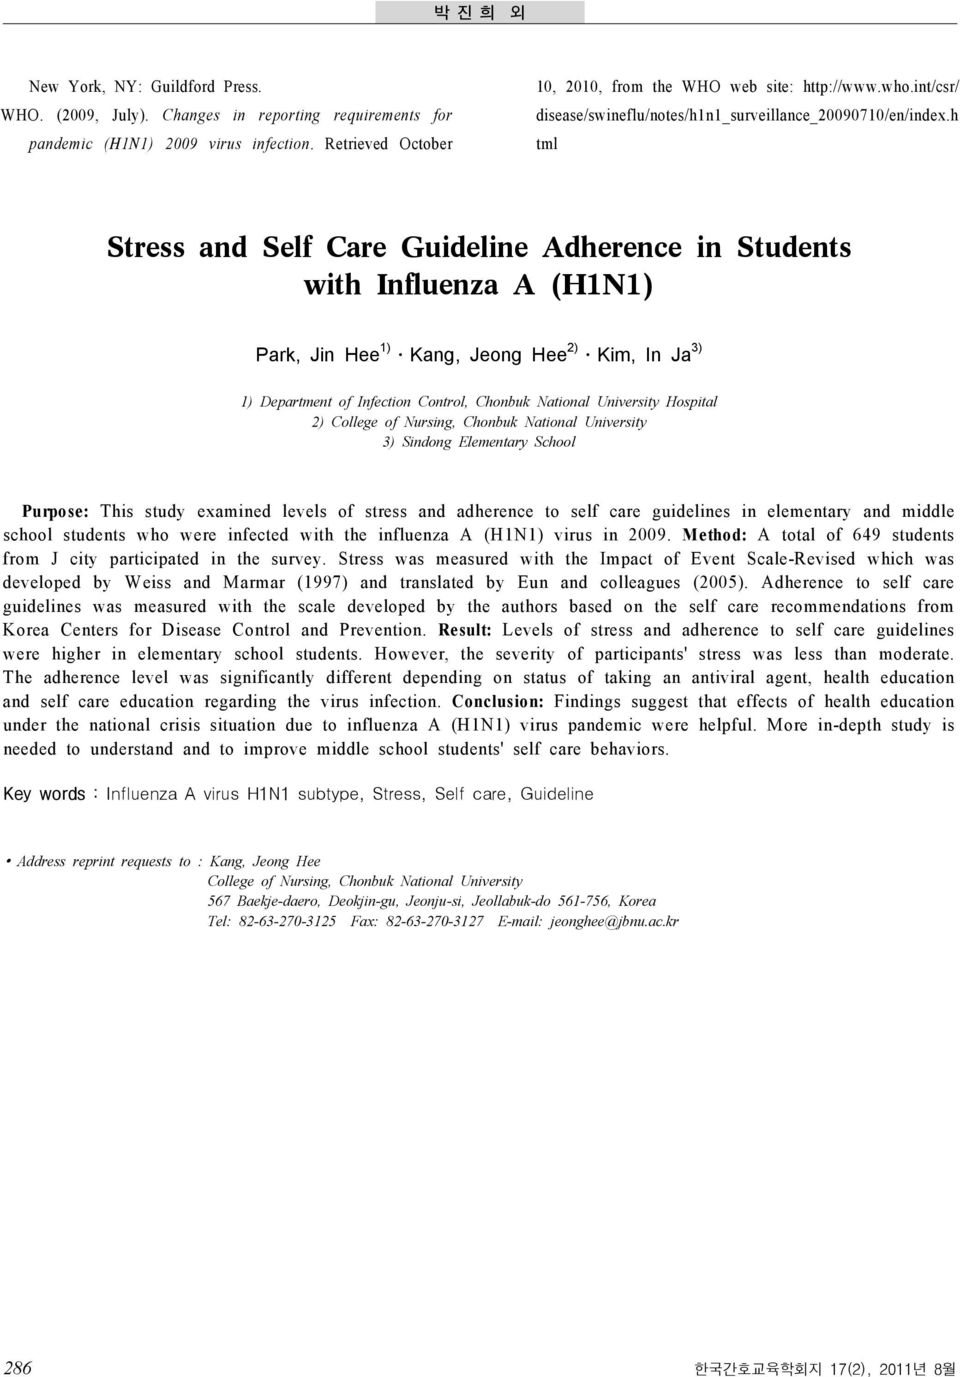 h tml Stress and Self Care Guideline Adherence in Students with Influenza A (H1N1) Park, Jin Hee 1) Kang, Jeong Hee 2) Kim, In Ja 3) 1) Department of Infection Control, Chonbuk National University